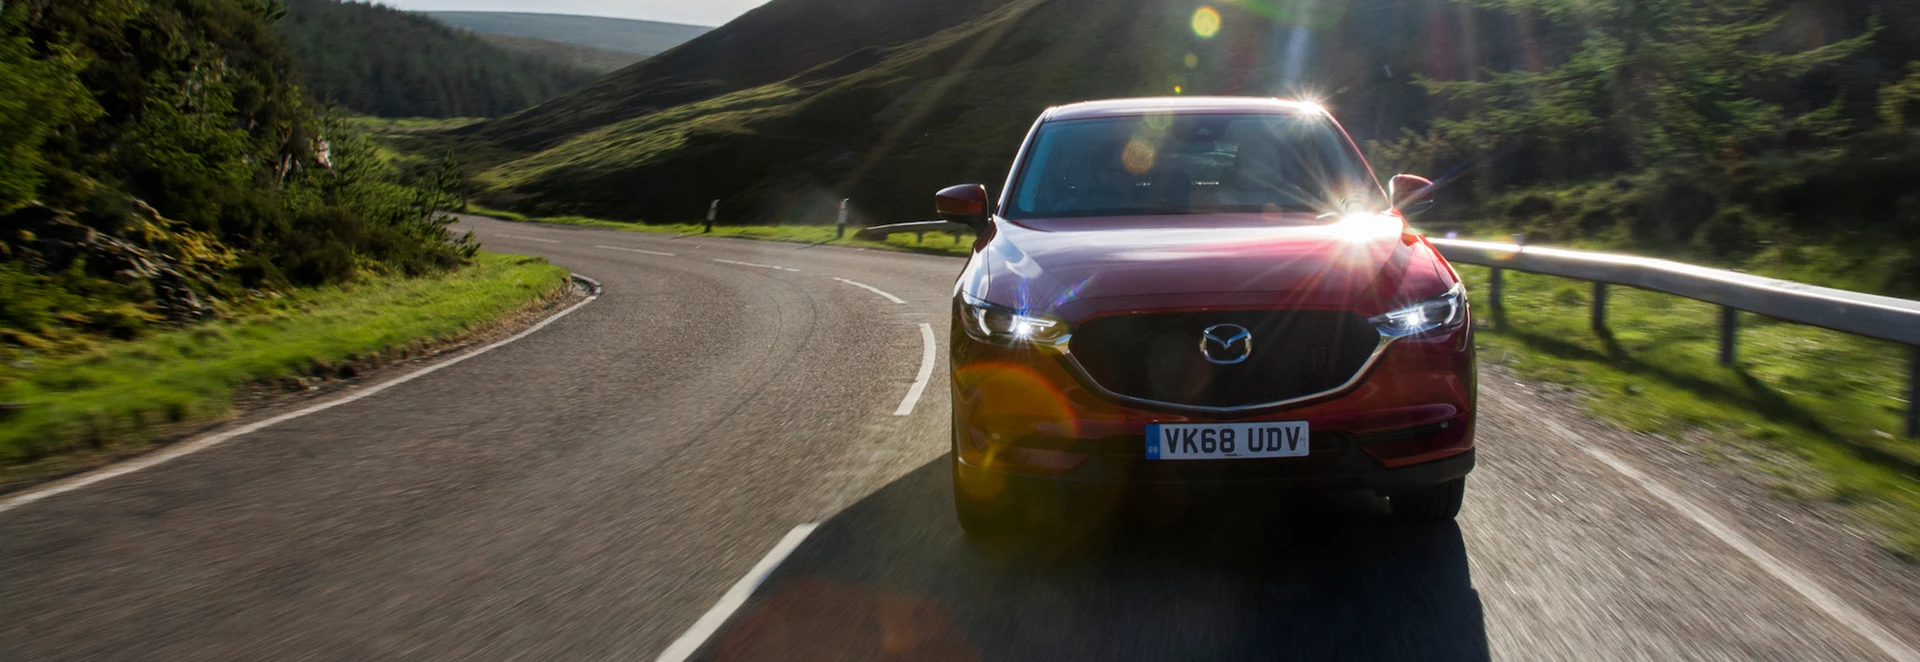 Updated Mazda CX-5 on sale from August 31